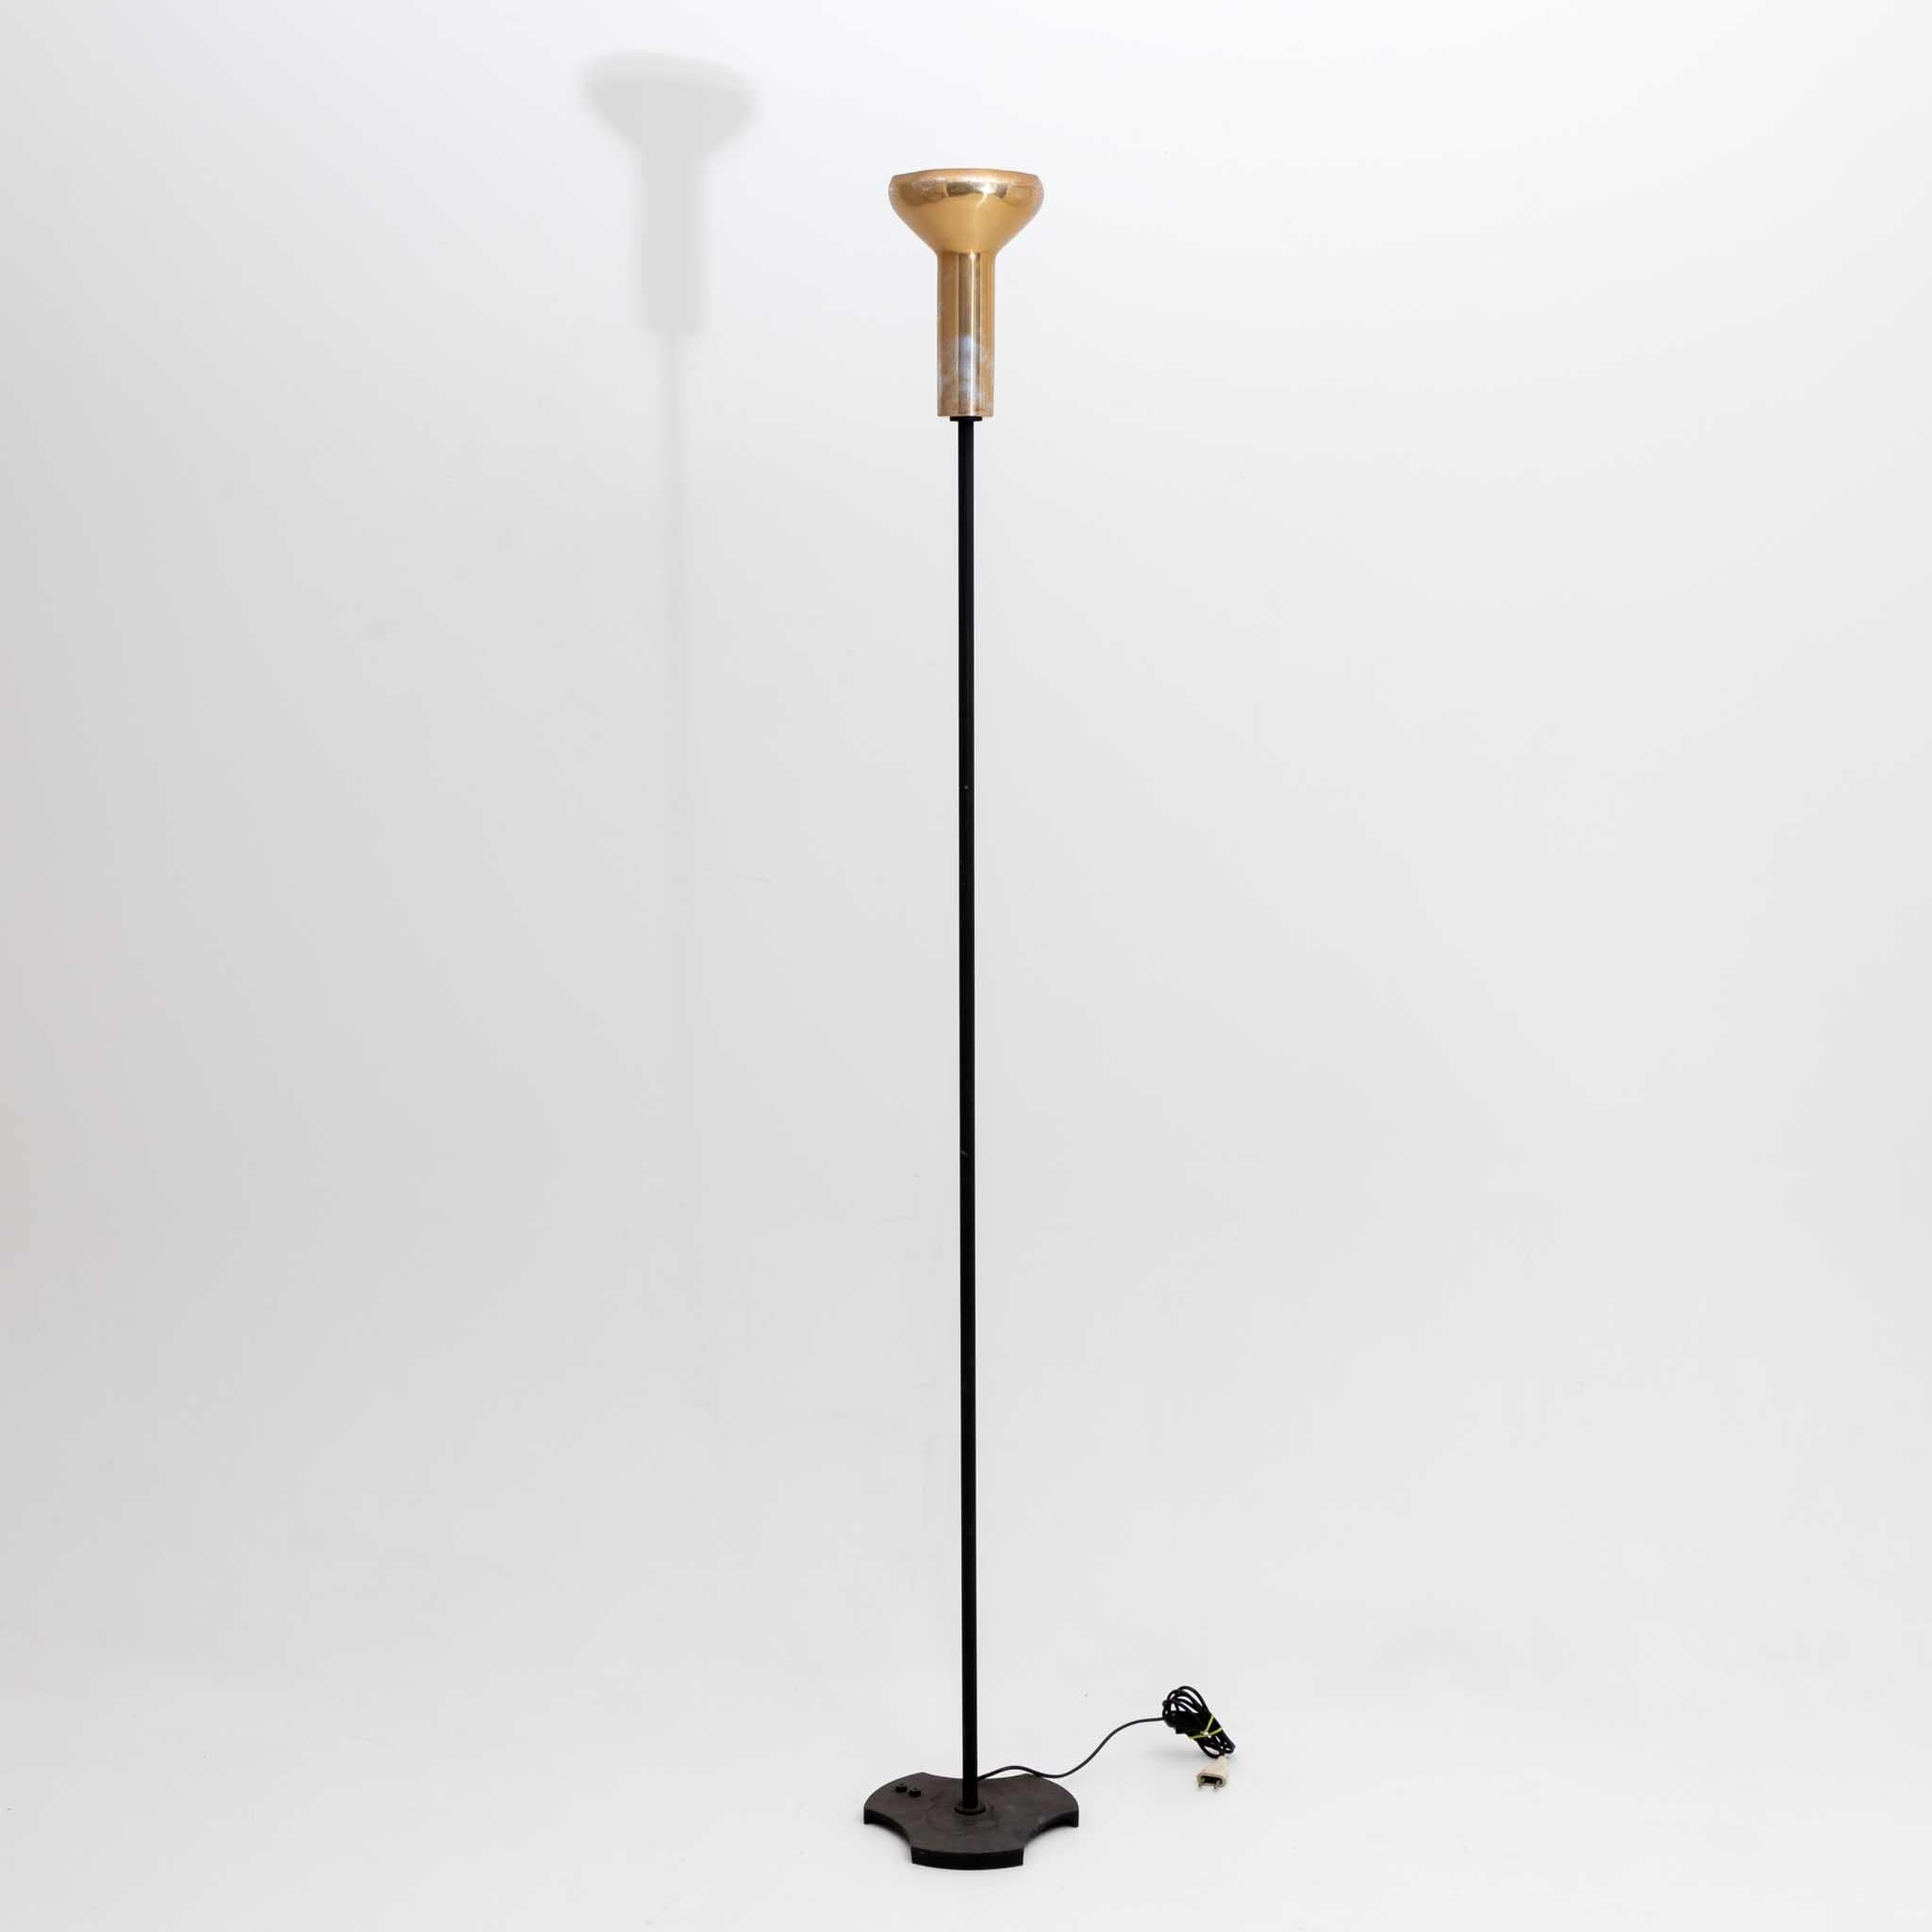 Mid-20th Century Floor Lamp Model 1073/3 by Gino Sarfatti for Arteluce, Italy 1956 For Sale